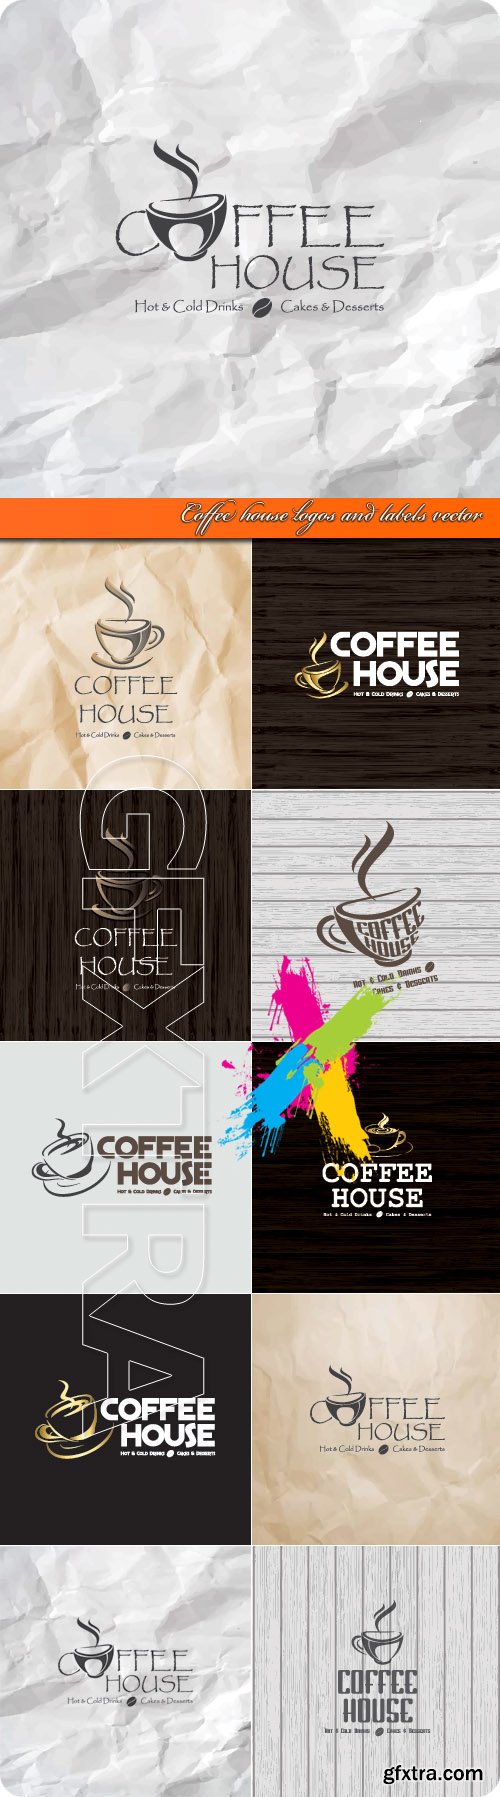 Coffee house logos and labels vector